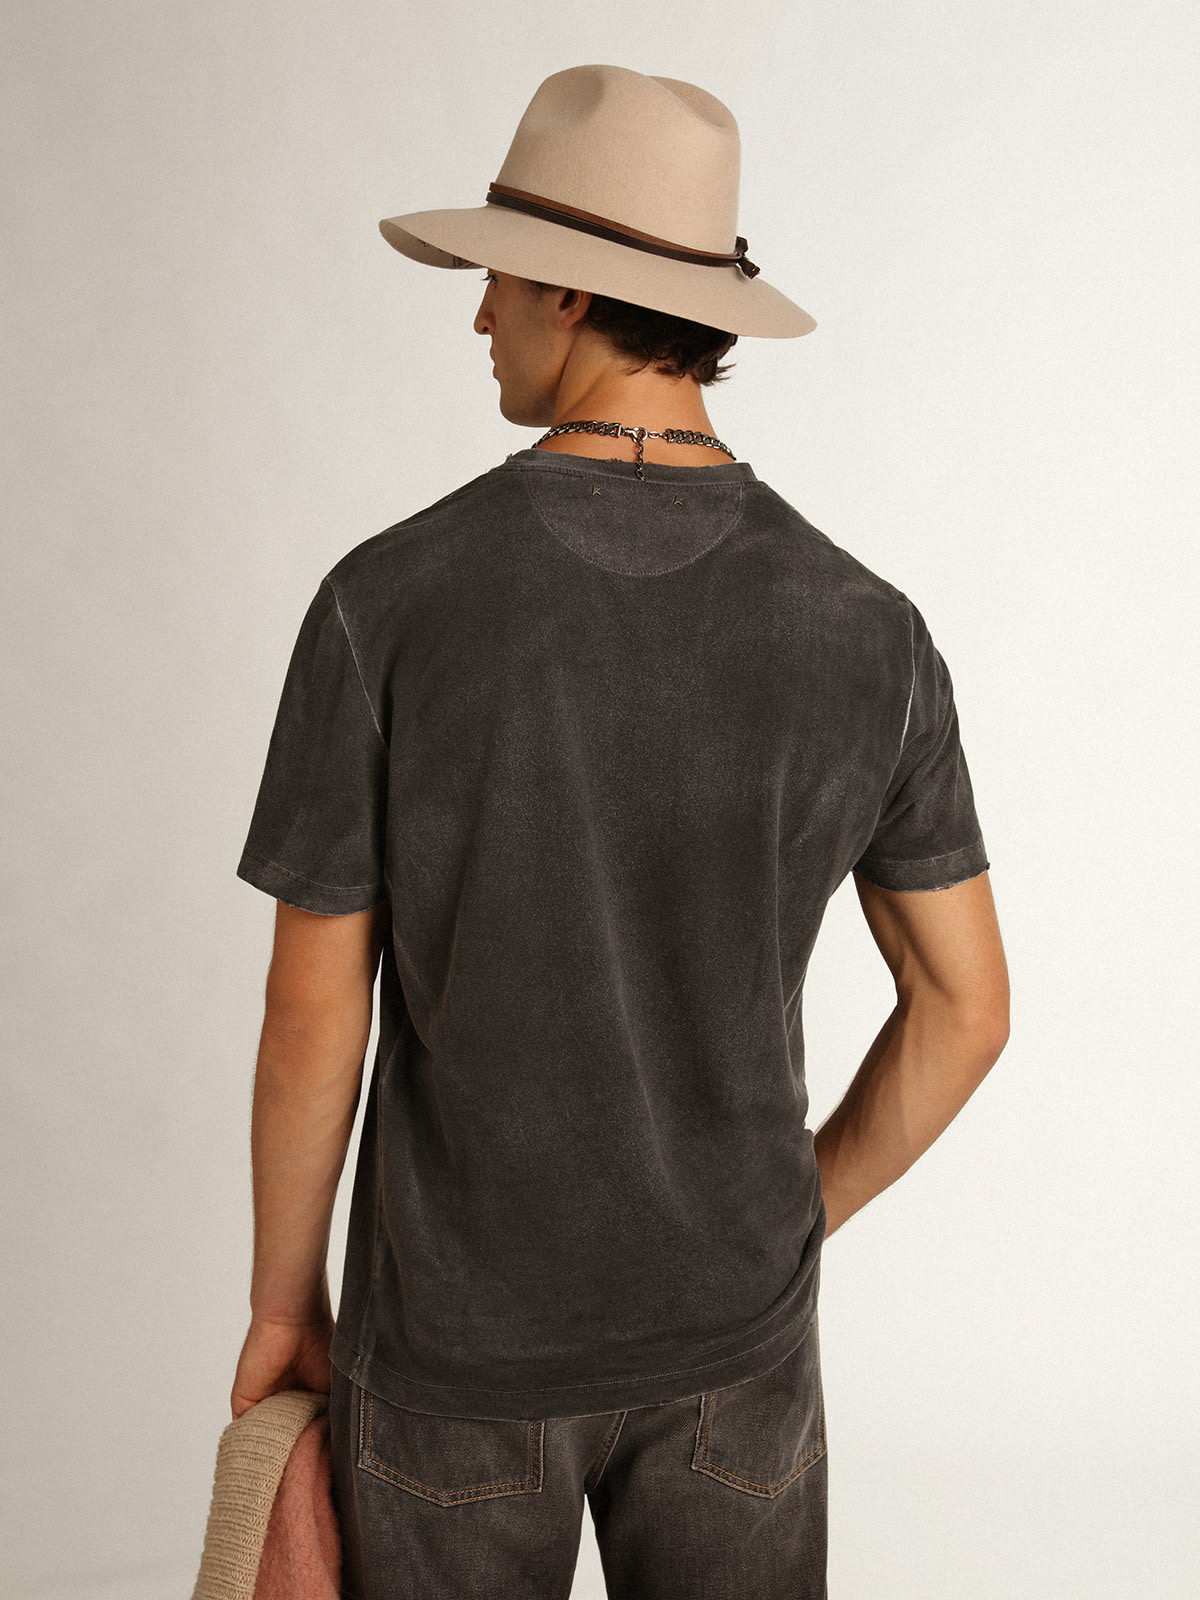 Golden Goose - Aged-look gray Journey Collection T-shirt with contrasting seagrass-colored print on the front and hand-worn areas on the edging in 